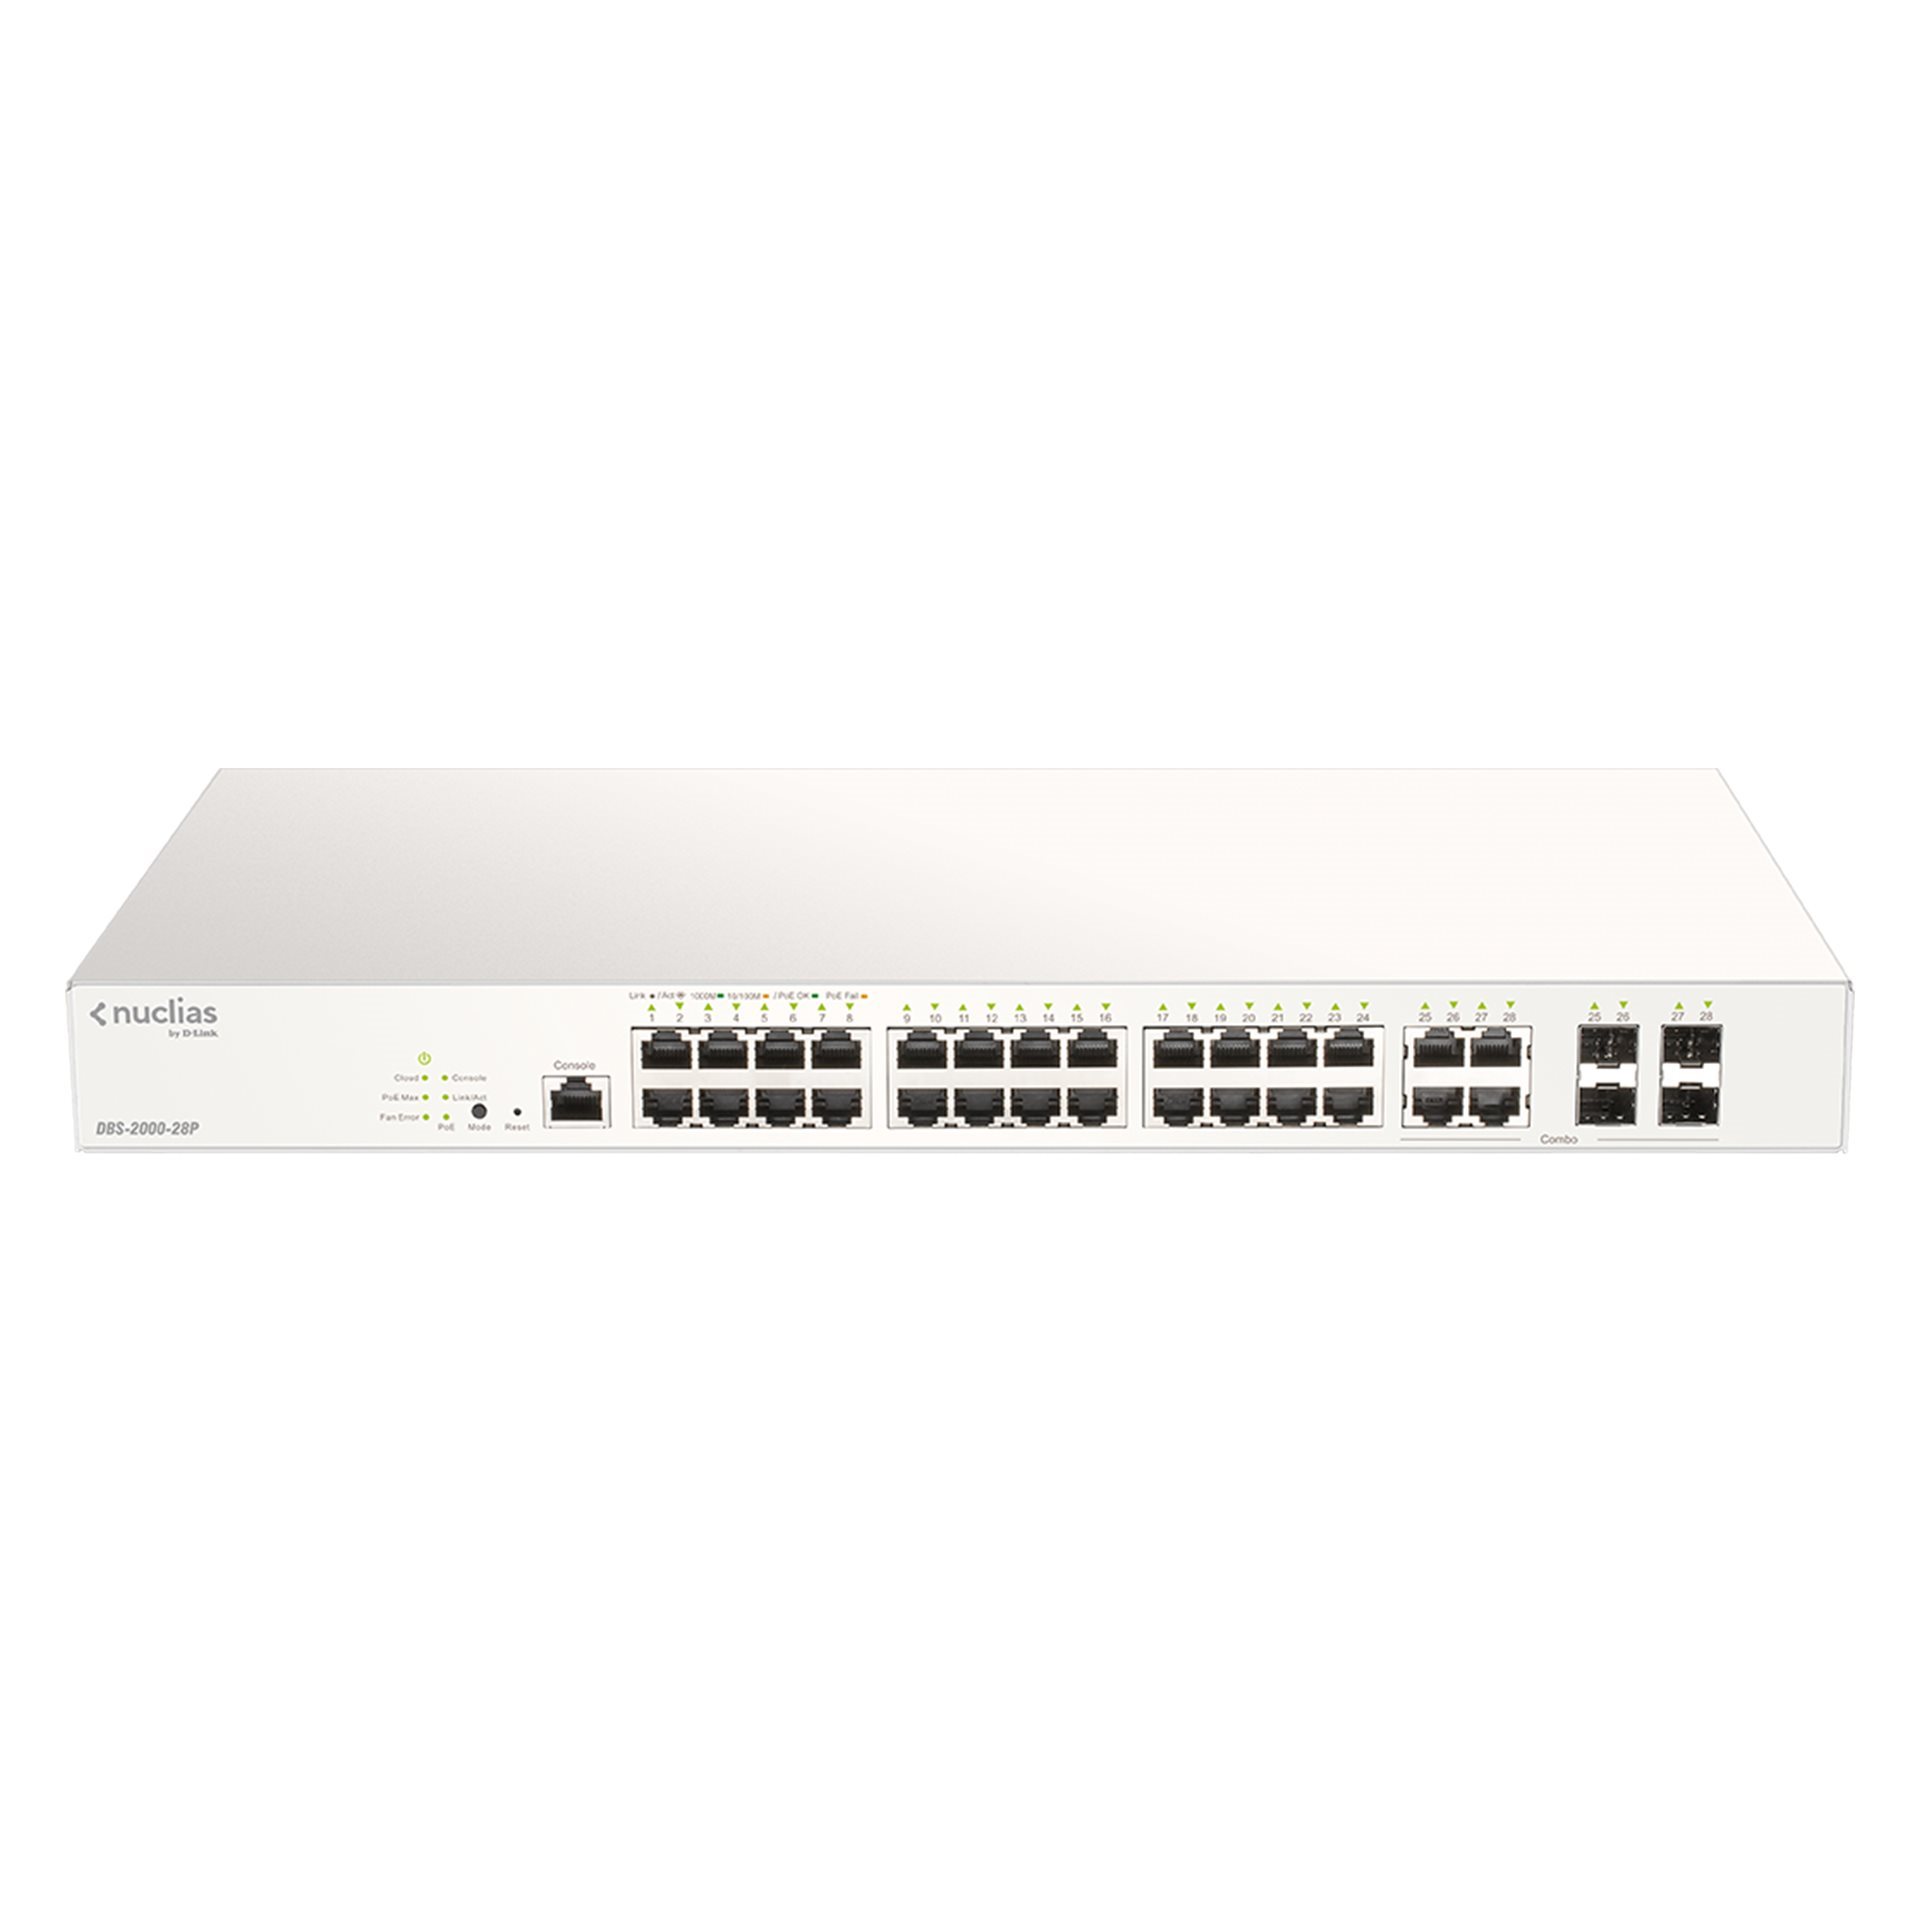   Switch ethernet   Nuclias Switch 24 Giga PoE at 193W + 4 Combo SFP DBS-2000-28P